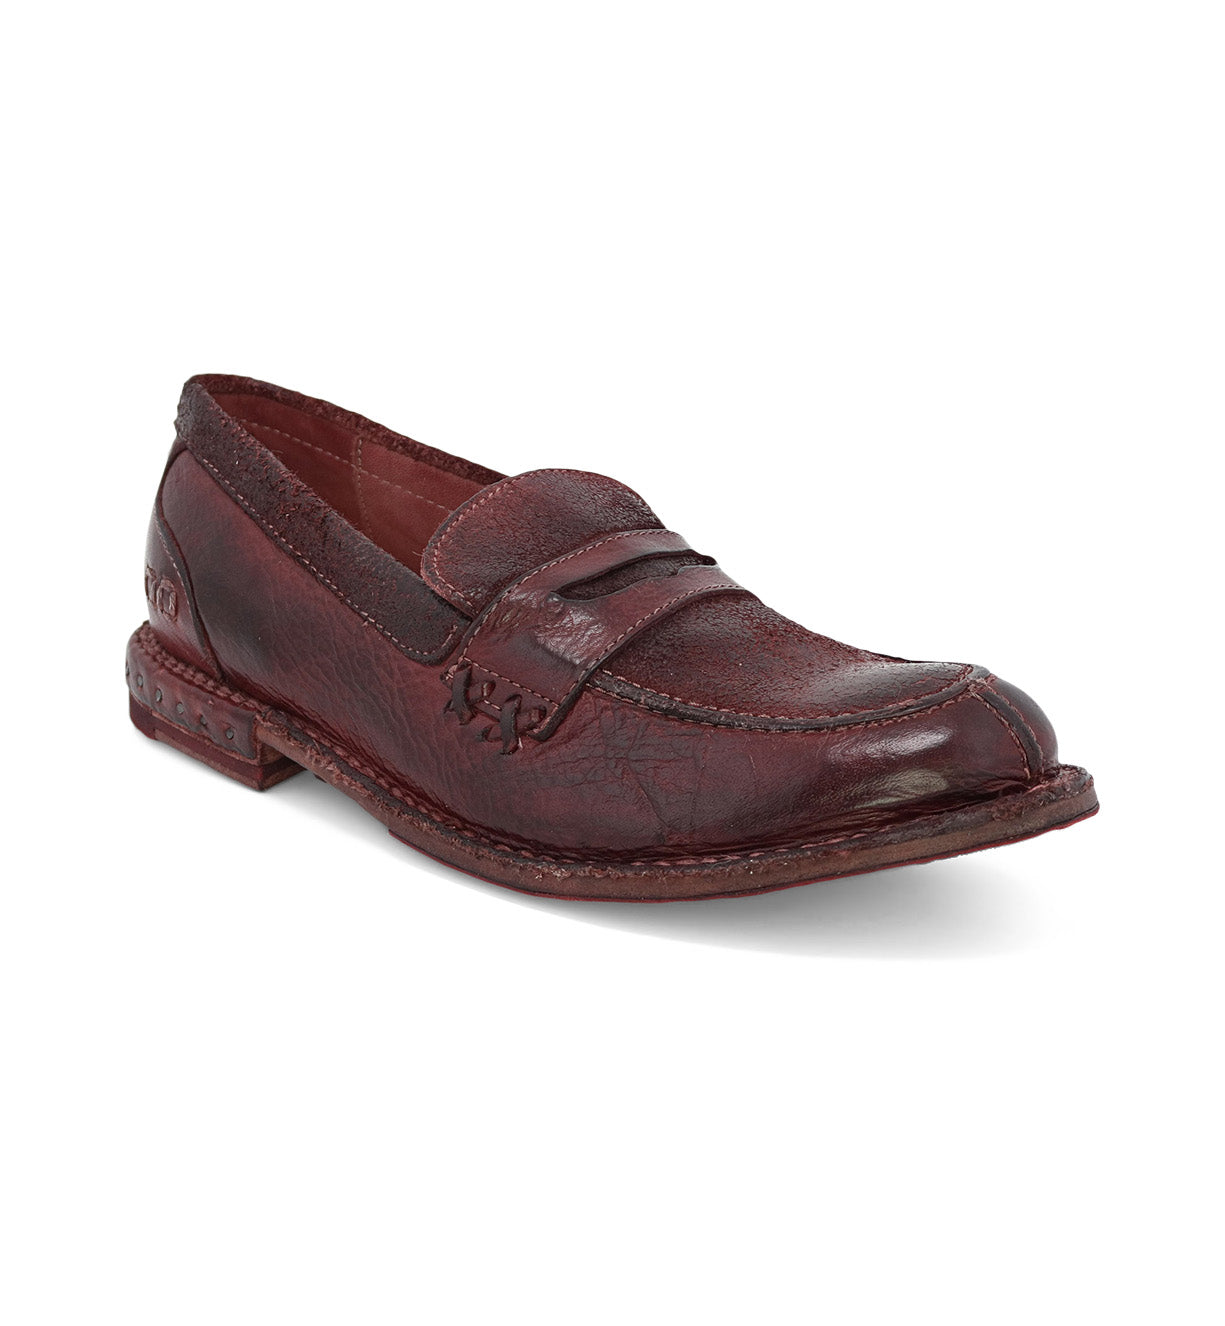 A women's Reina burgundy loafer on a white background by Bed Stu.